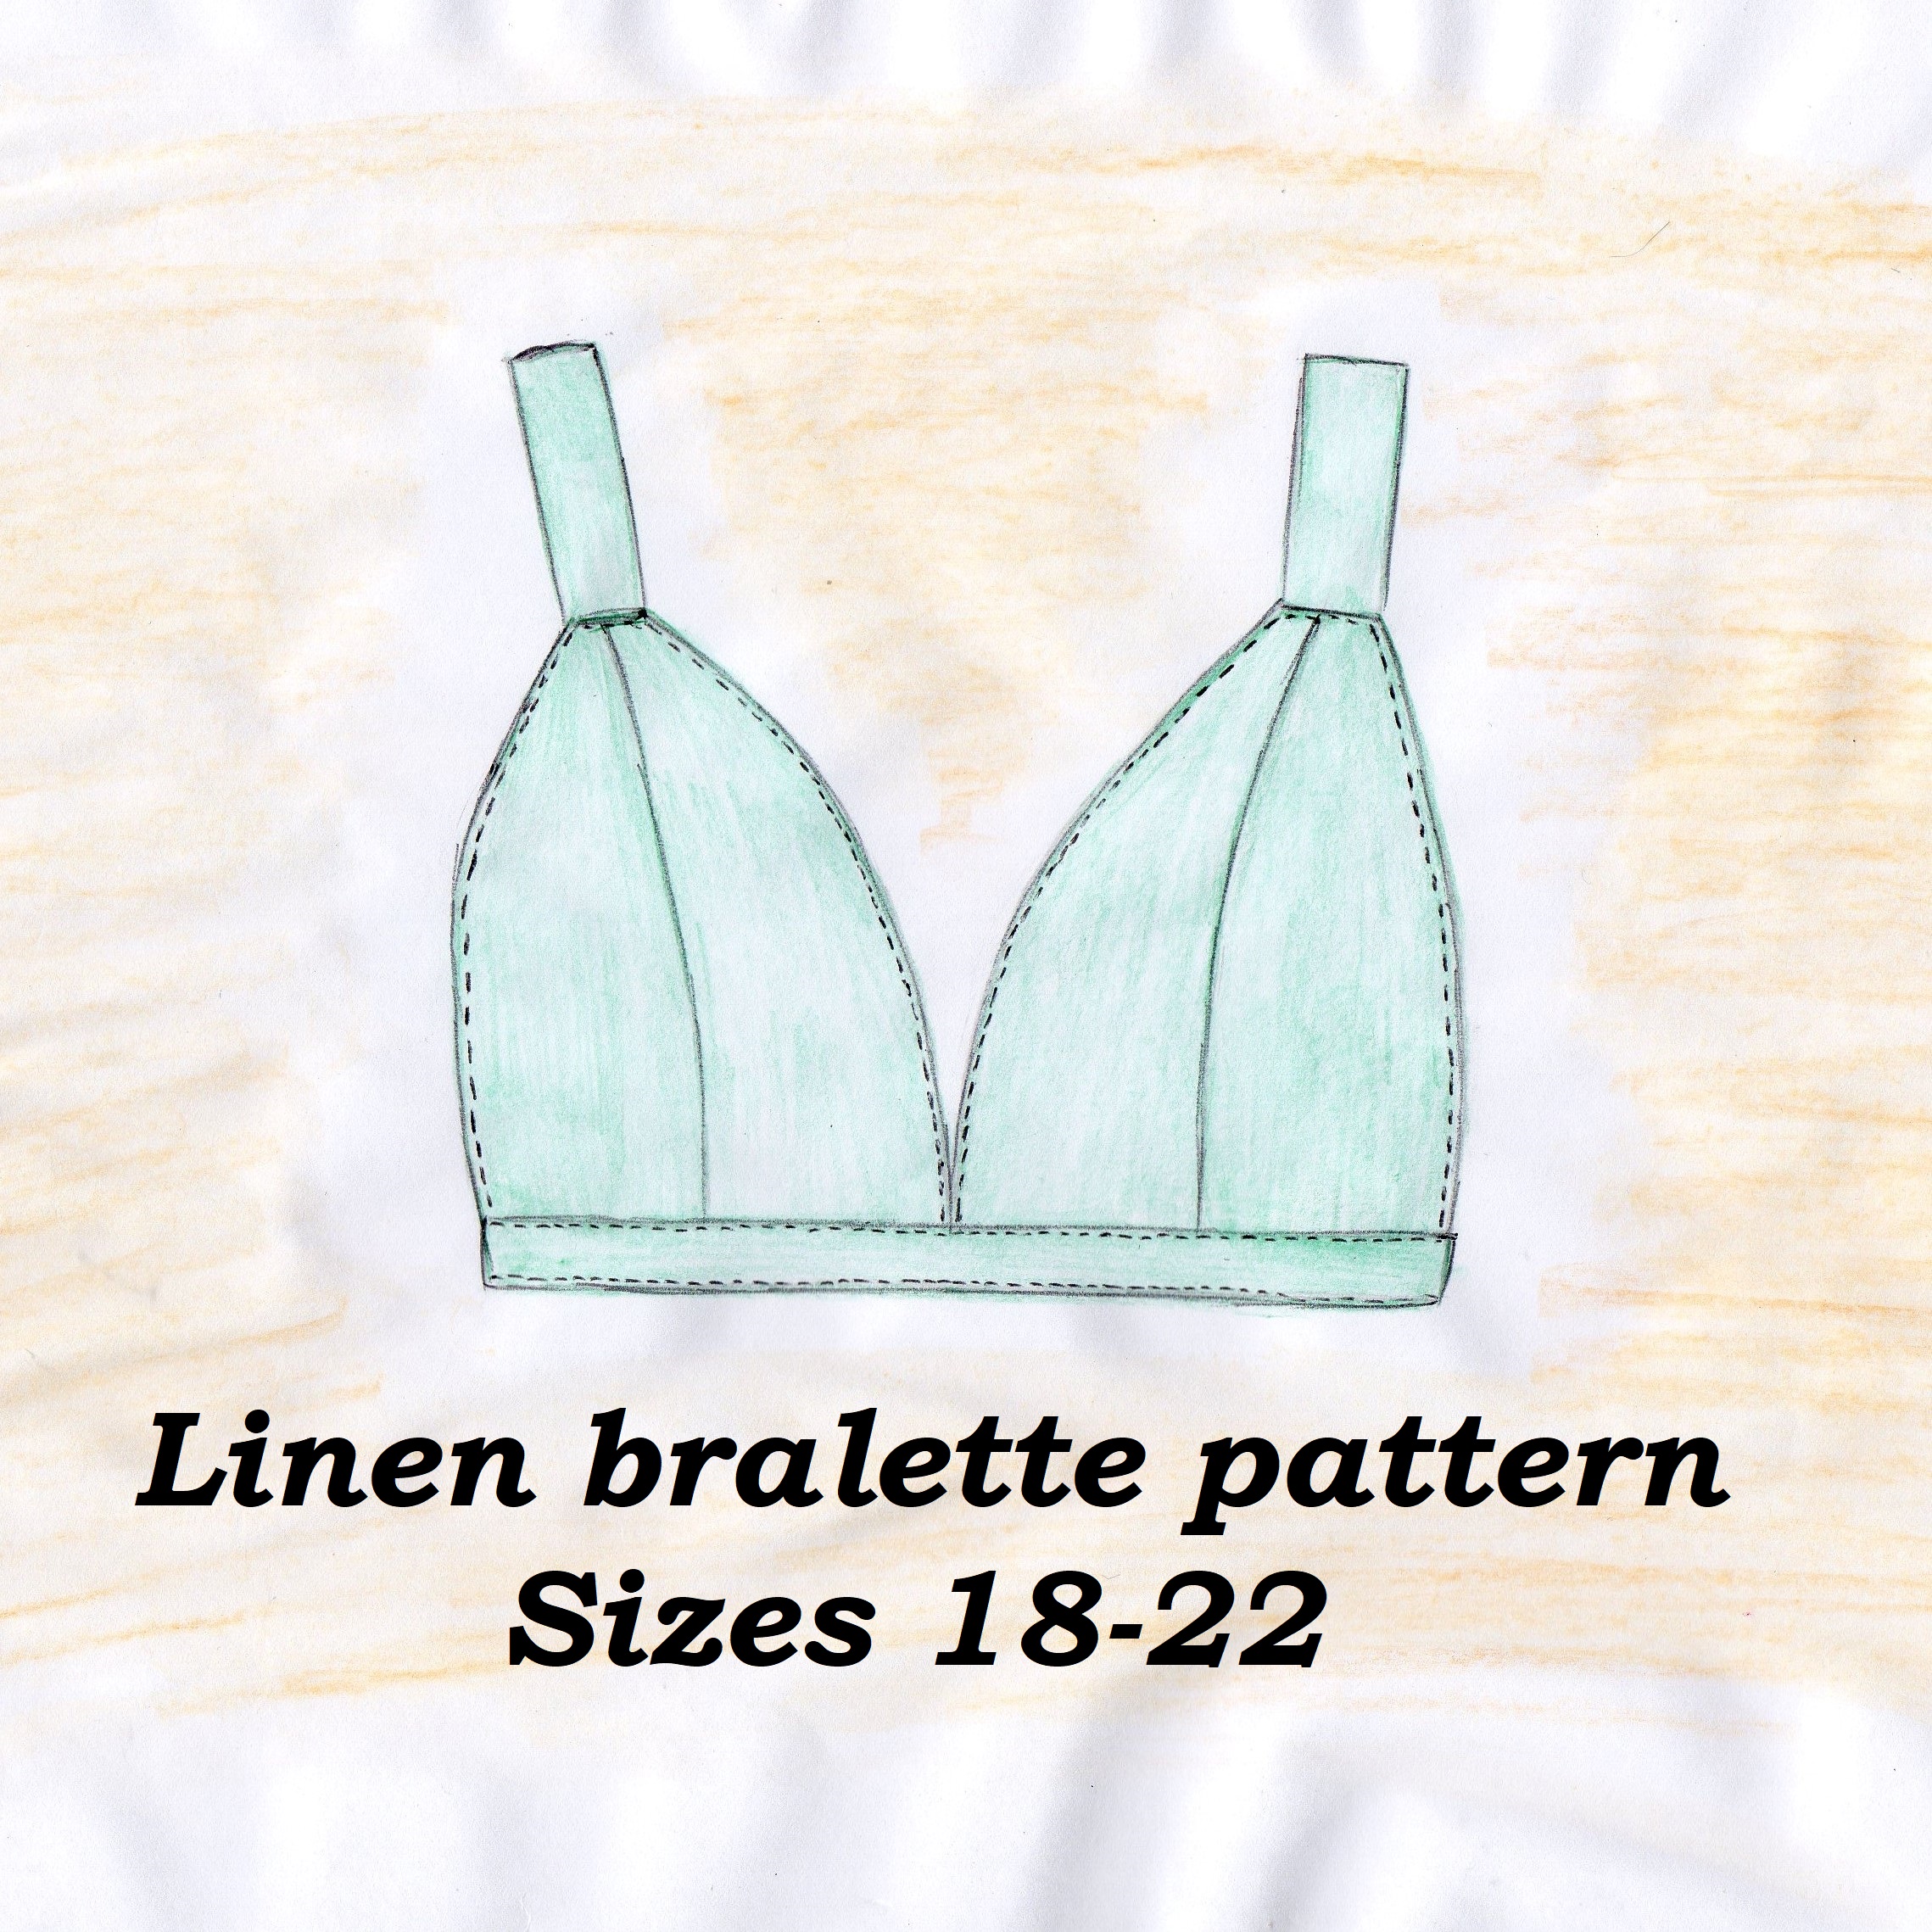 Stylish Linen Bralette, Hand Sewn and Embroidered